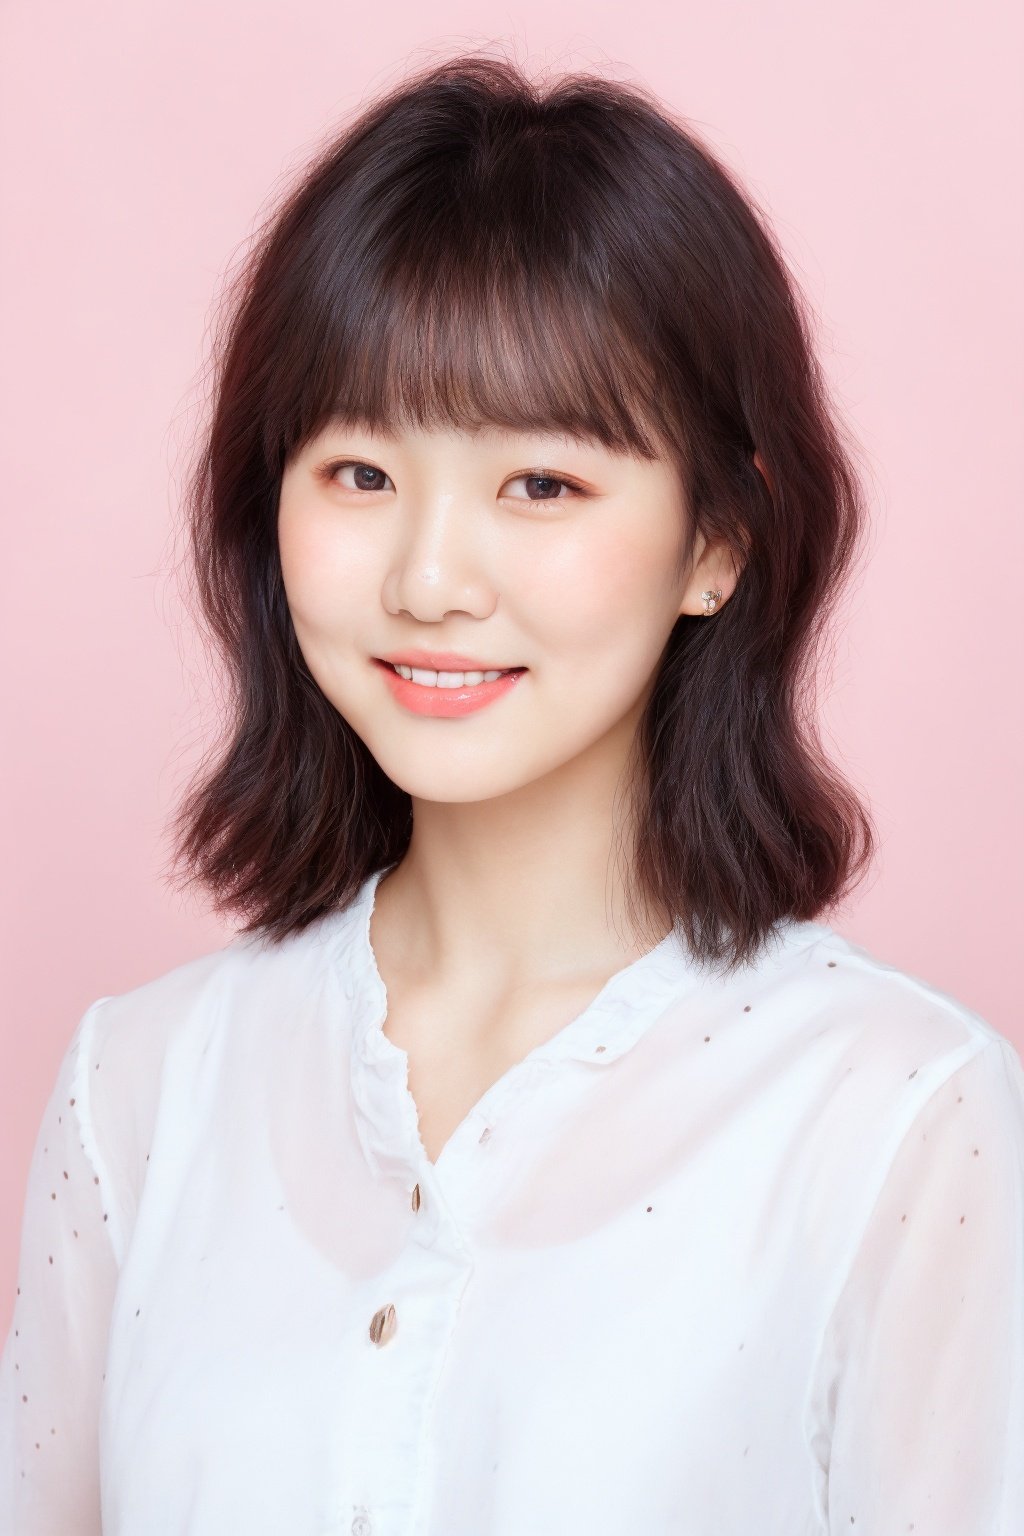 ID photo, (a 5-year-old girl: 1.5), solo, upper body, an Asian girl with short white hair, (blue eyes: 2.0) ' (chubby face: 1.5), (beauty mole: 1.5), white shirt, peach blossom, tender skin, she smiles at the camera, (pink solid background: 1.5), blue_IDphoto